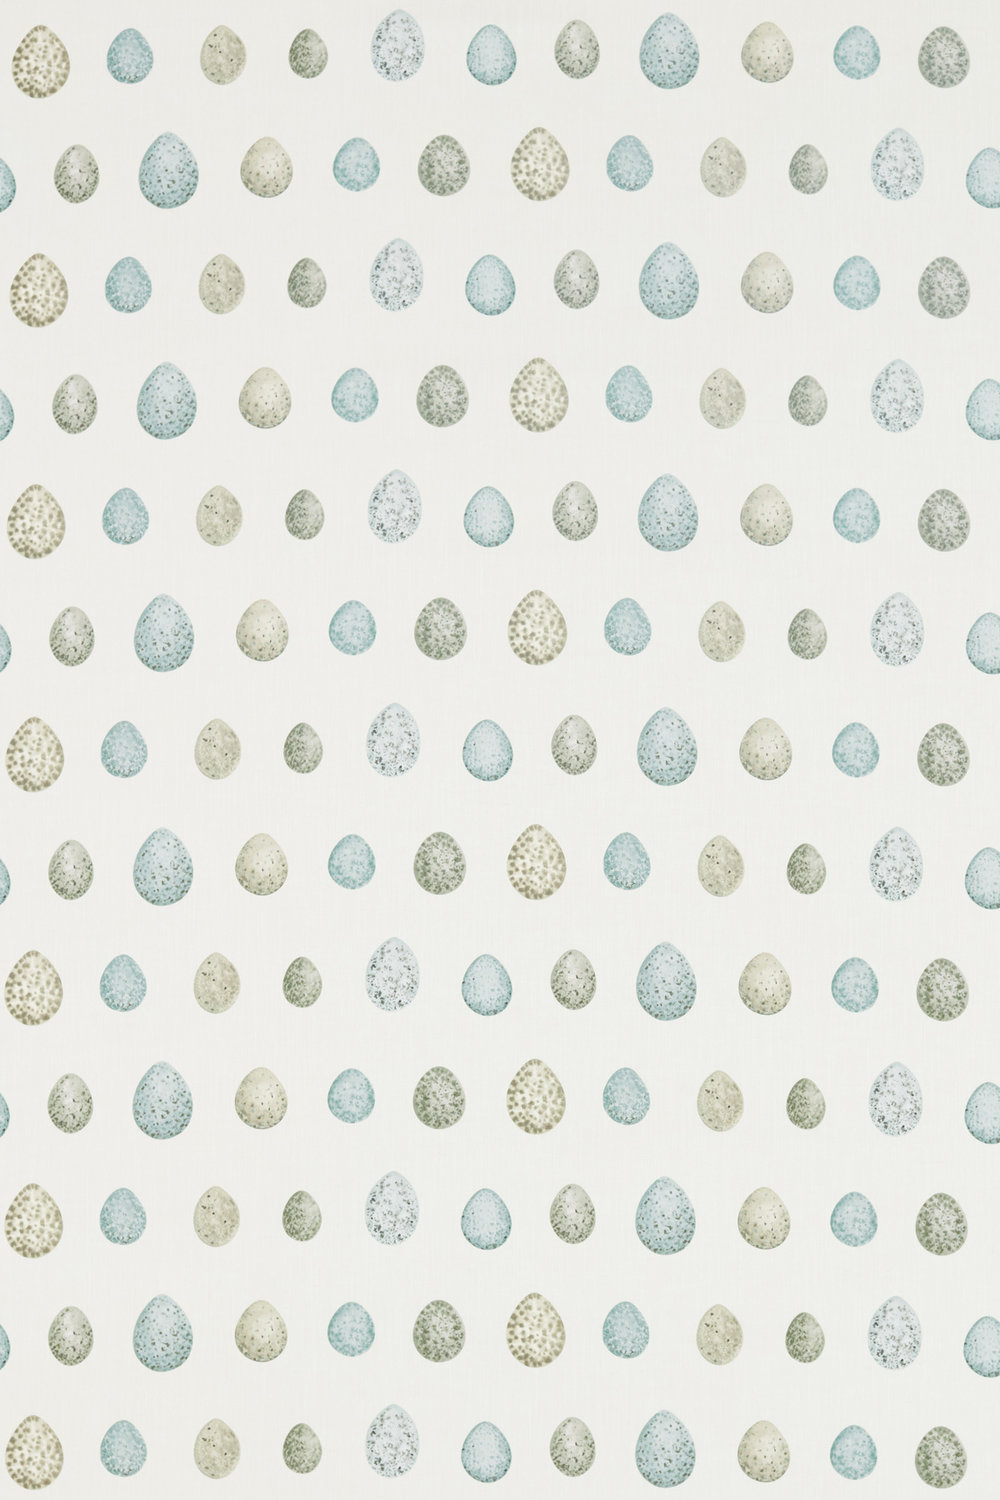 Nest Egg Fabric - Eggshell and Ivory - by Sanderson